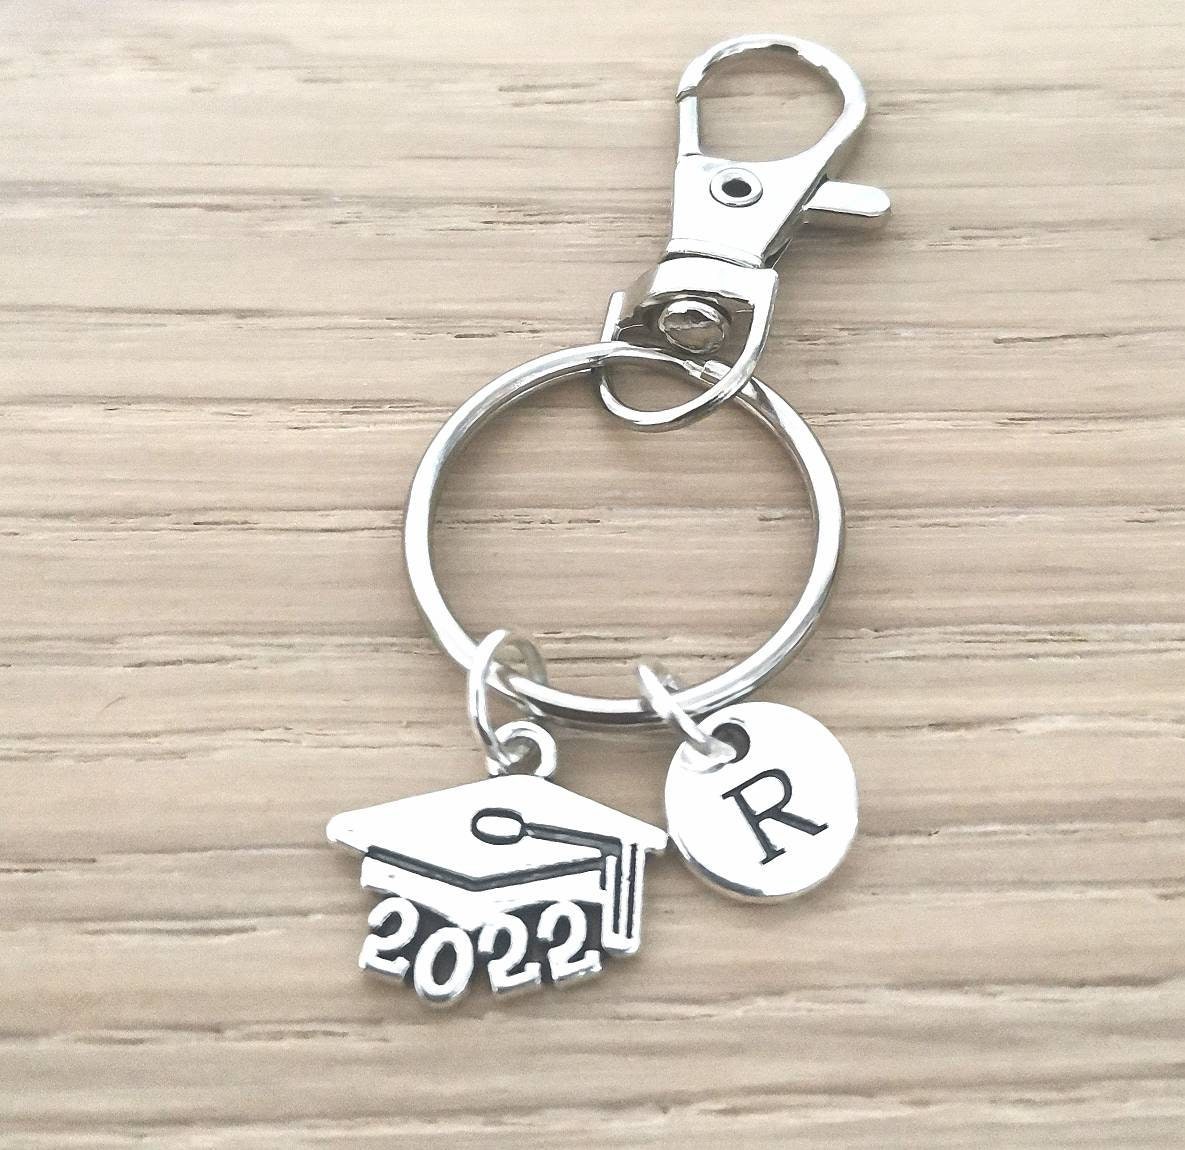 Class of 2022, Grad gifts for her, Grad gifts 2022,Graduation keychain, Graduation keyrings, Graduation gifts, gifts graduation, University